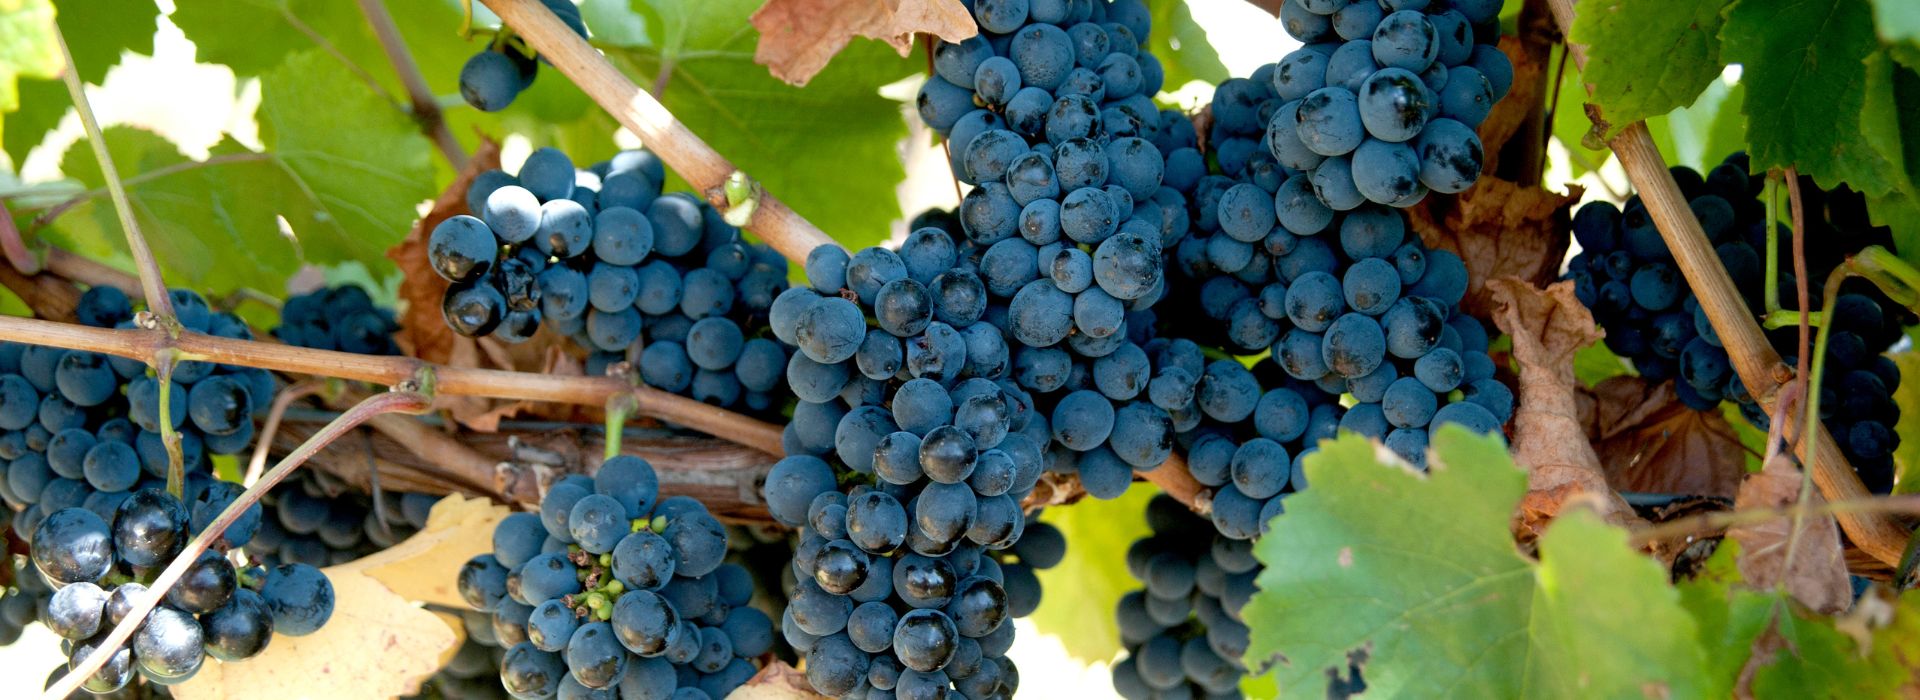 Black Grapes for Anti - Aging Support